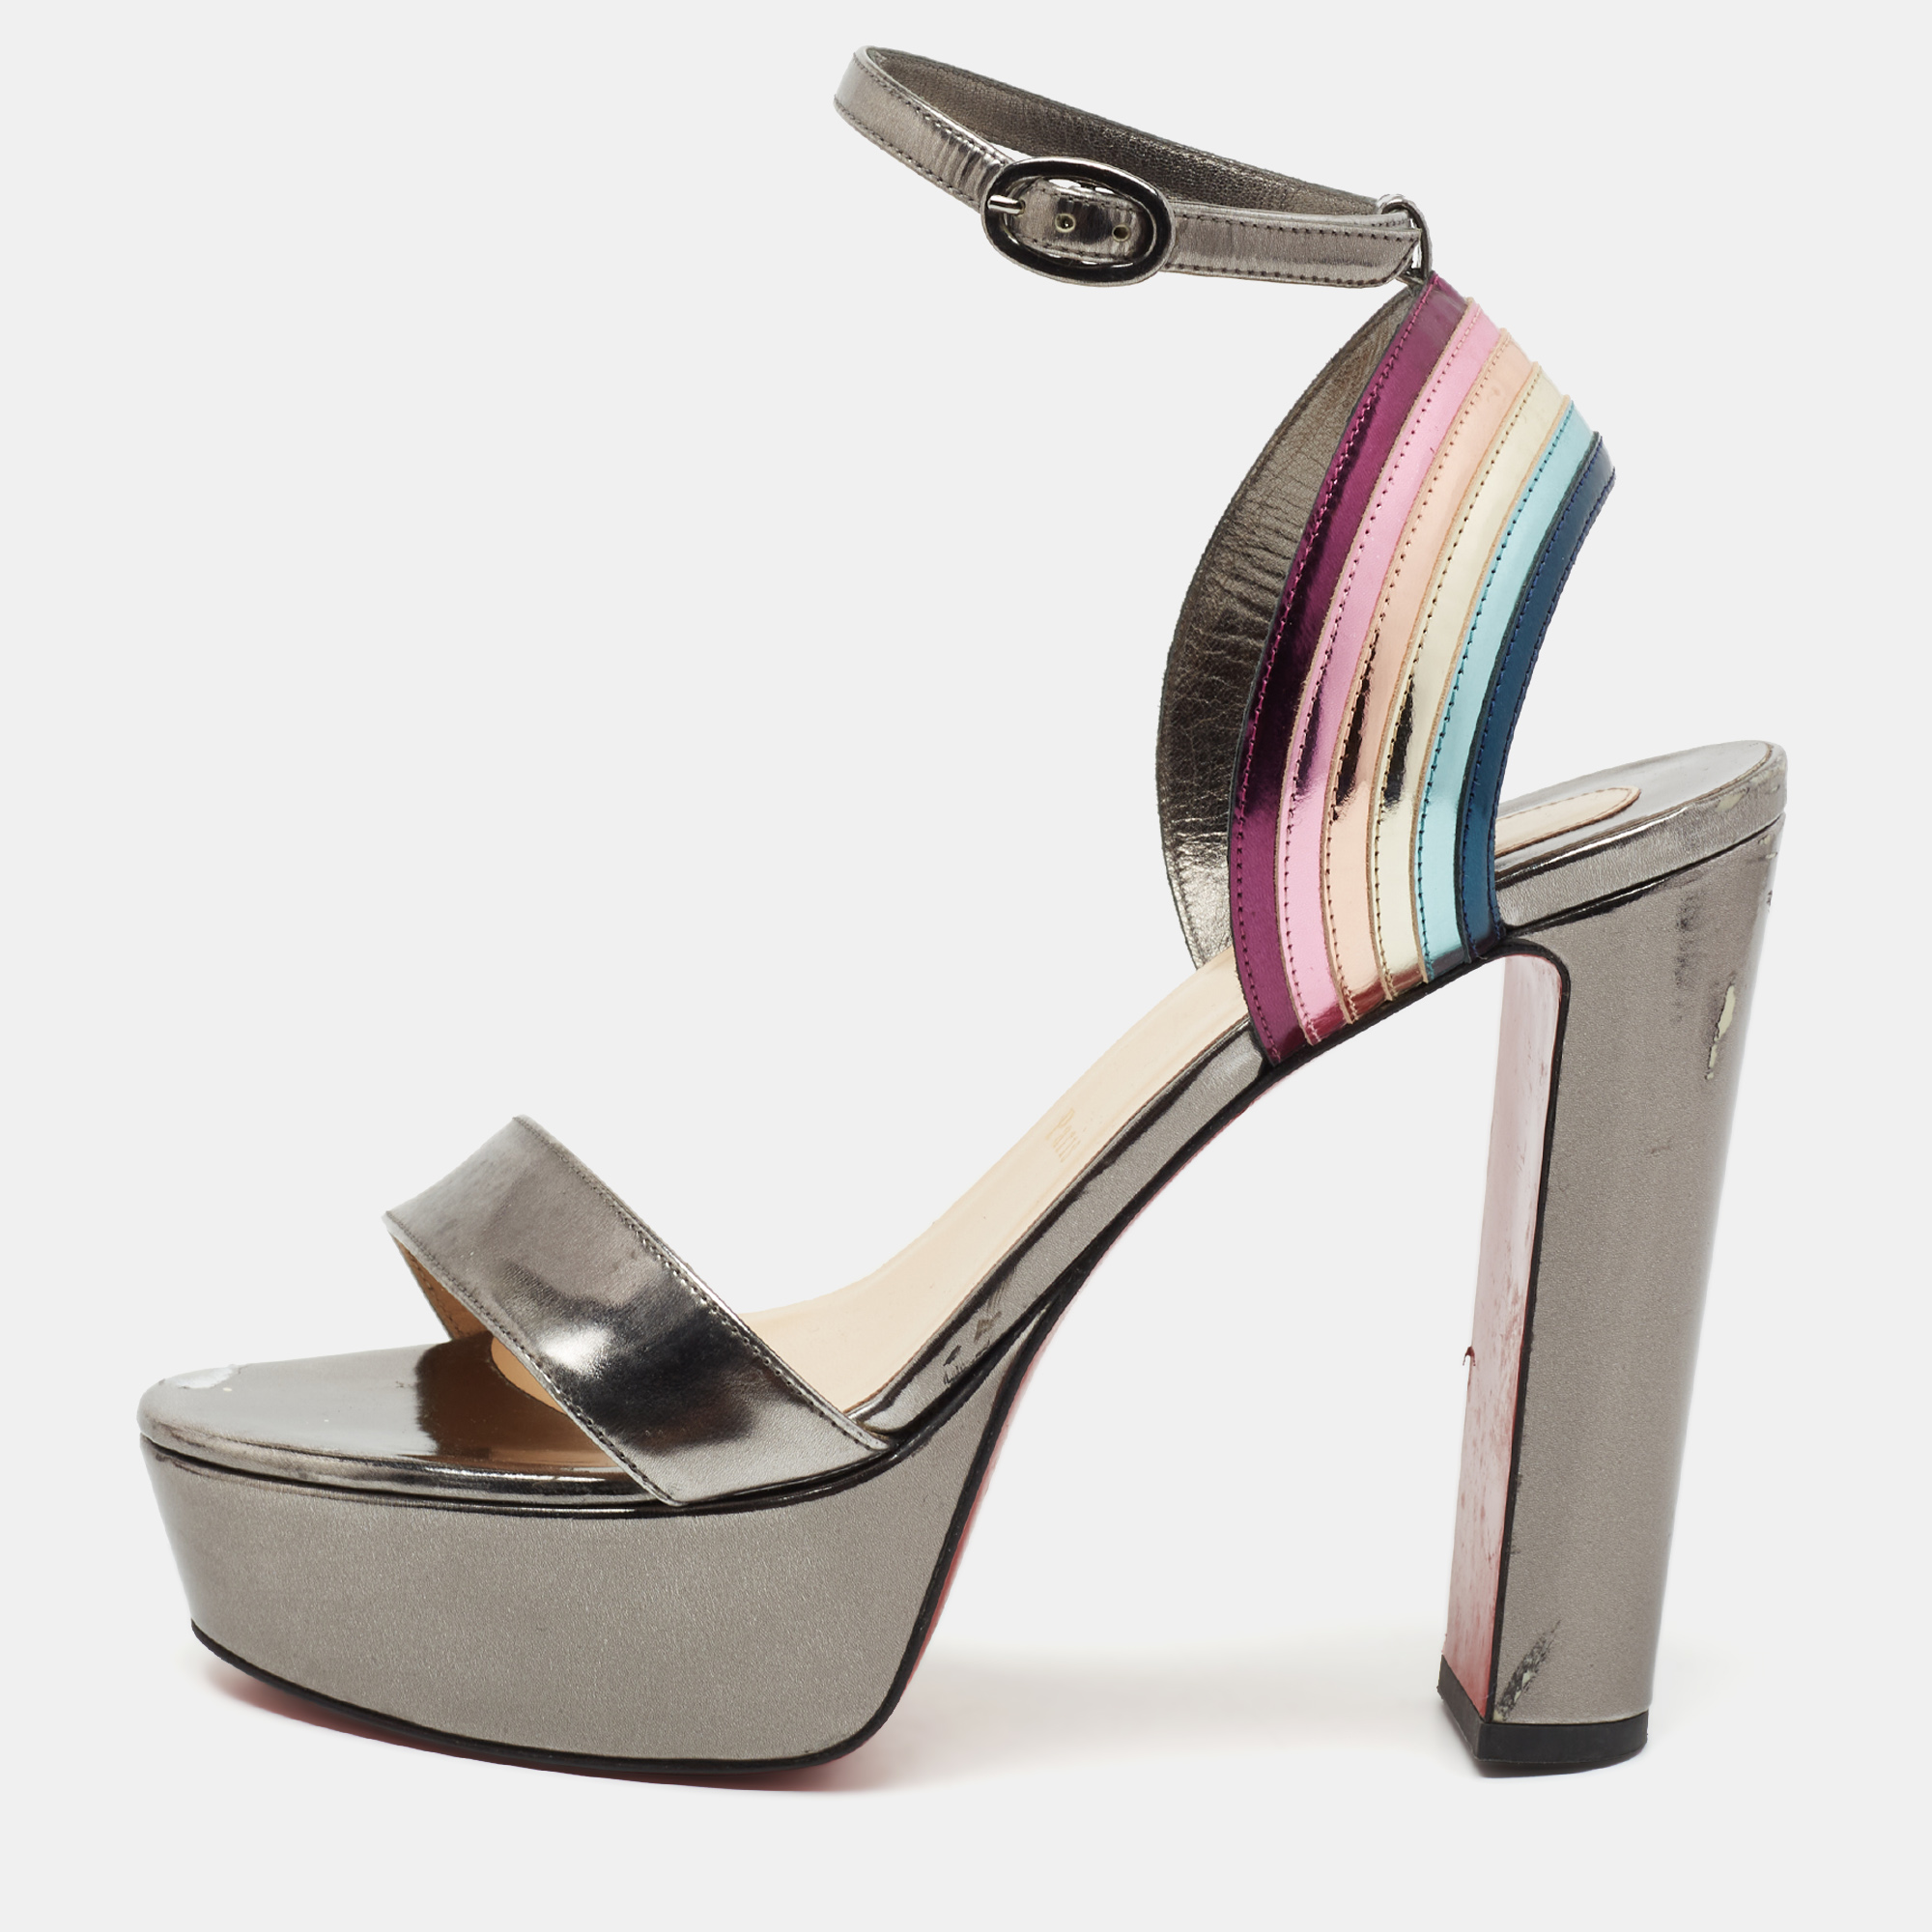 These platform sandals from Christian Louboutin deliver style beautifully They are crafted from metallic leather secured with buckles at the ankles and lifted on 3.5 cm platforms and 13 cm heels.